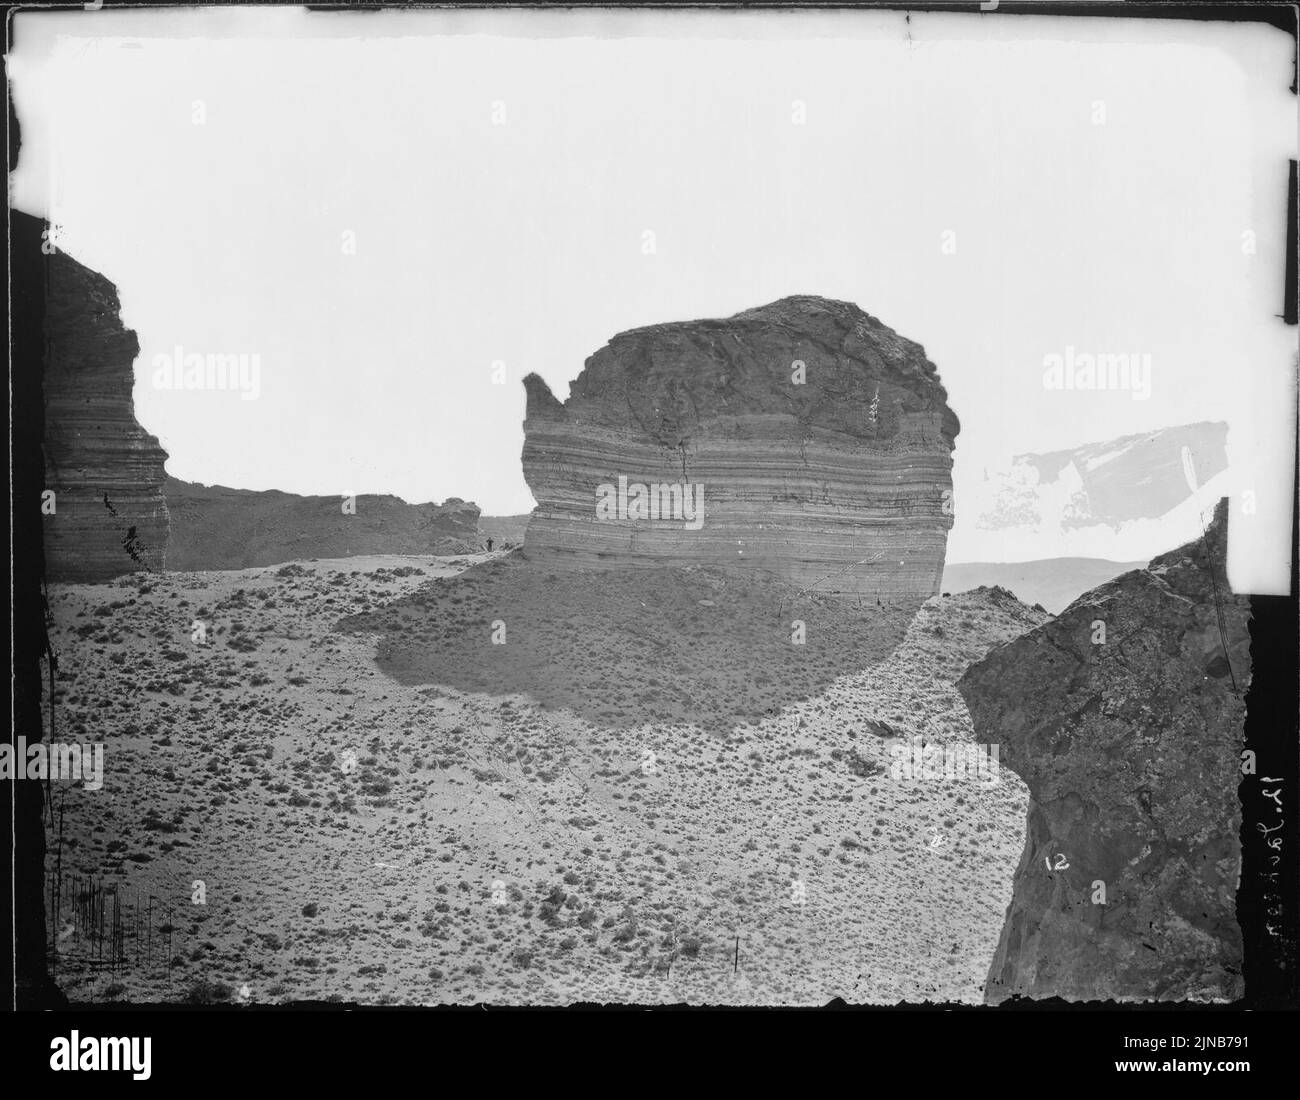 Teapot Rock, near Green River Station. Sweetwater County, Wyoming. Small figure of man at foot of spout gives an... Stock Photo